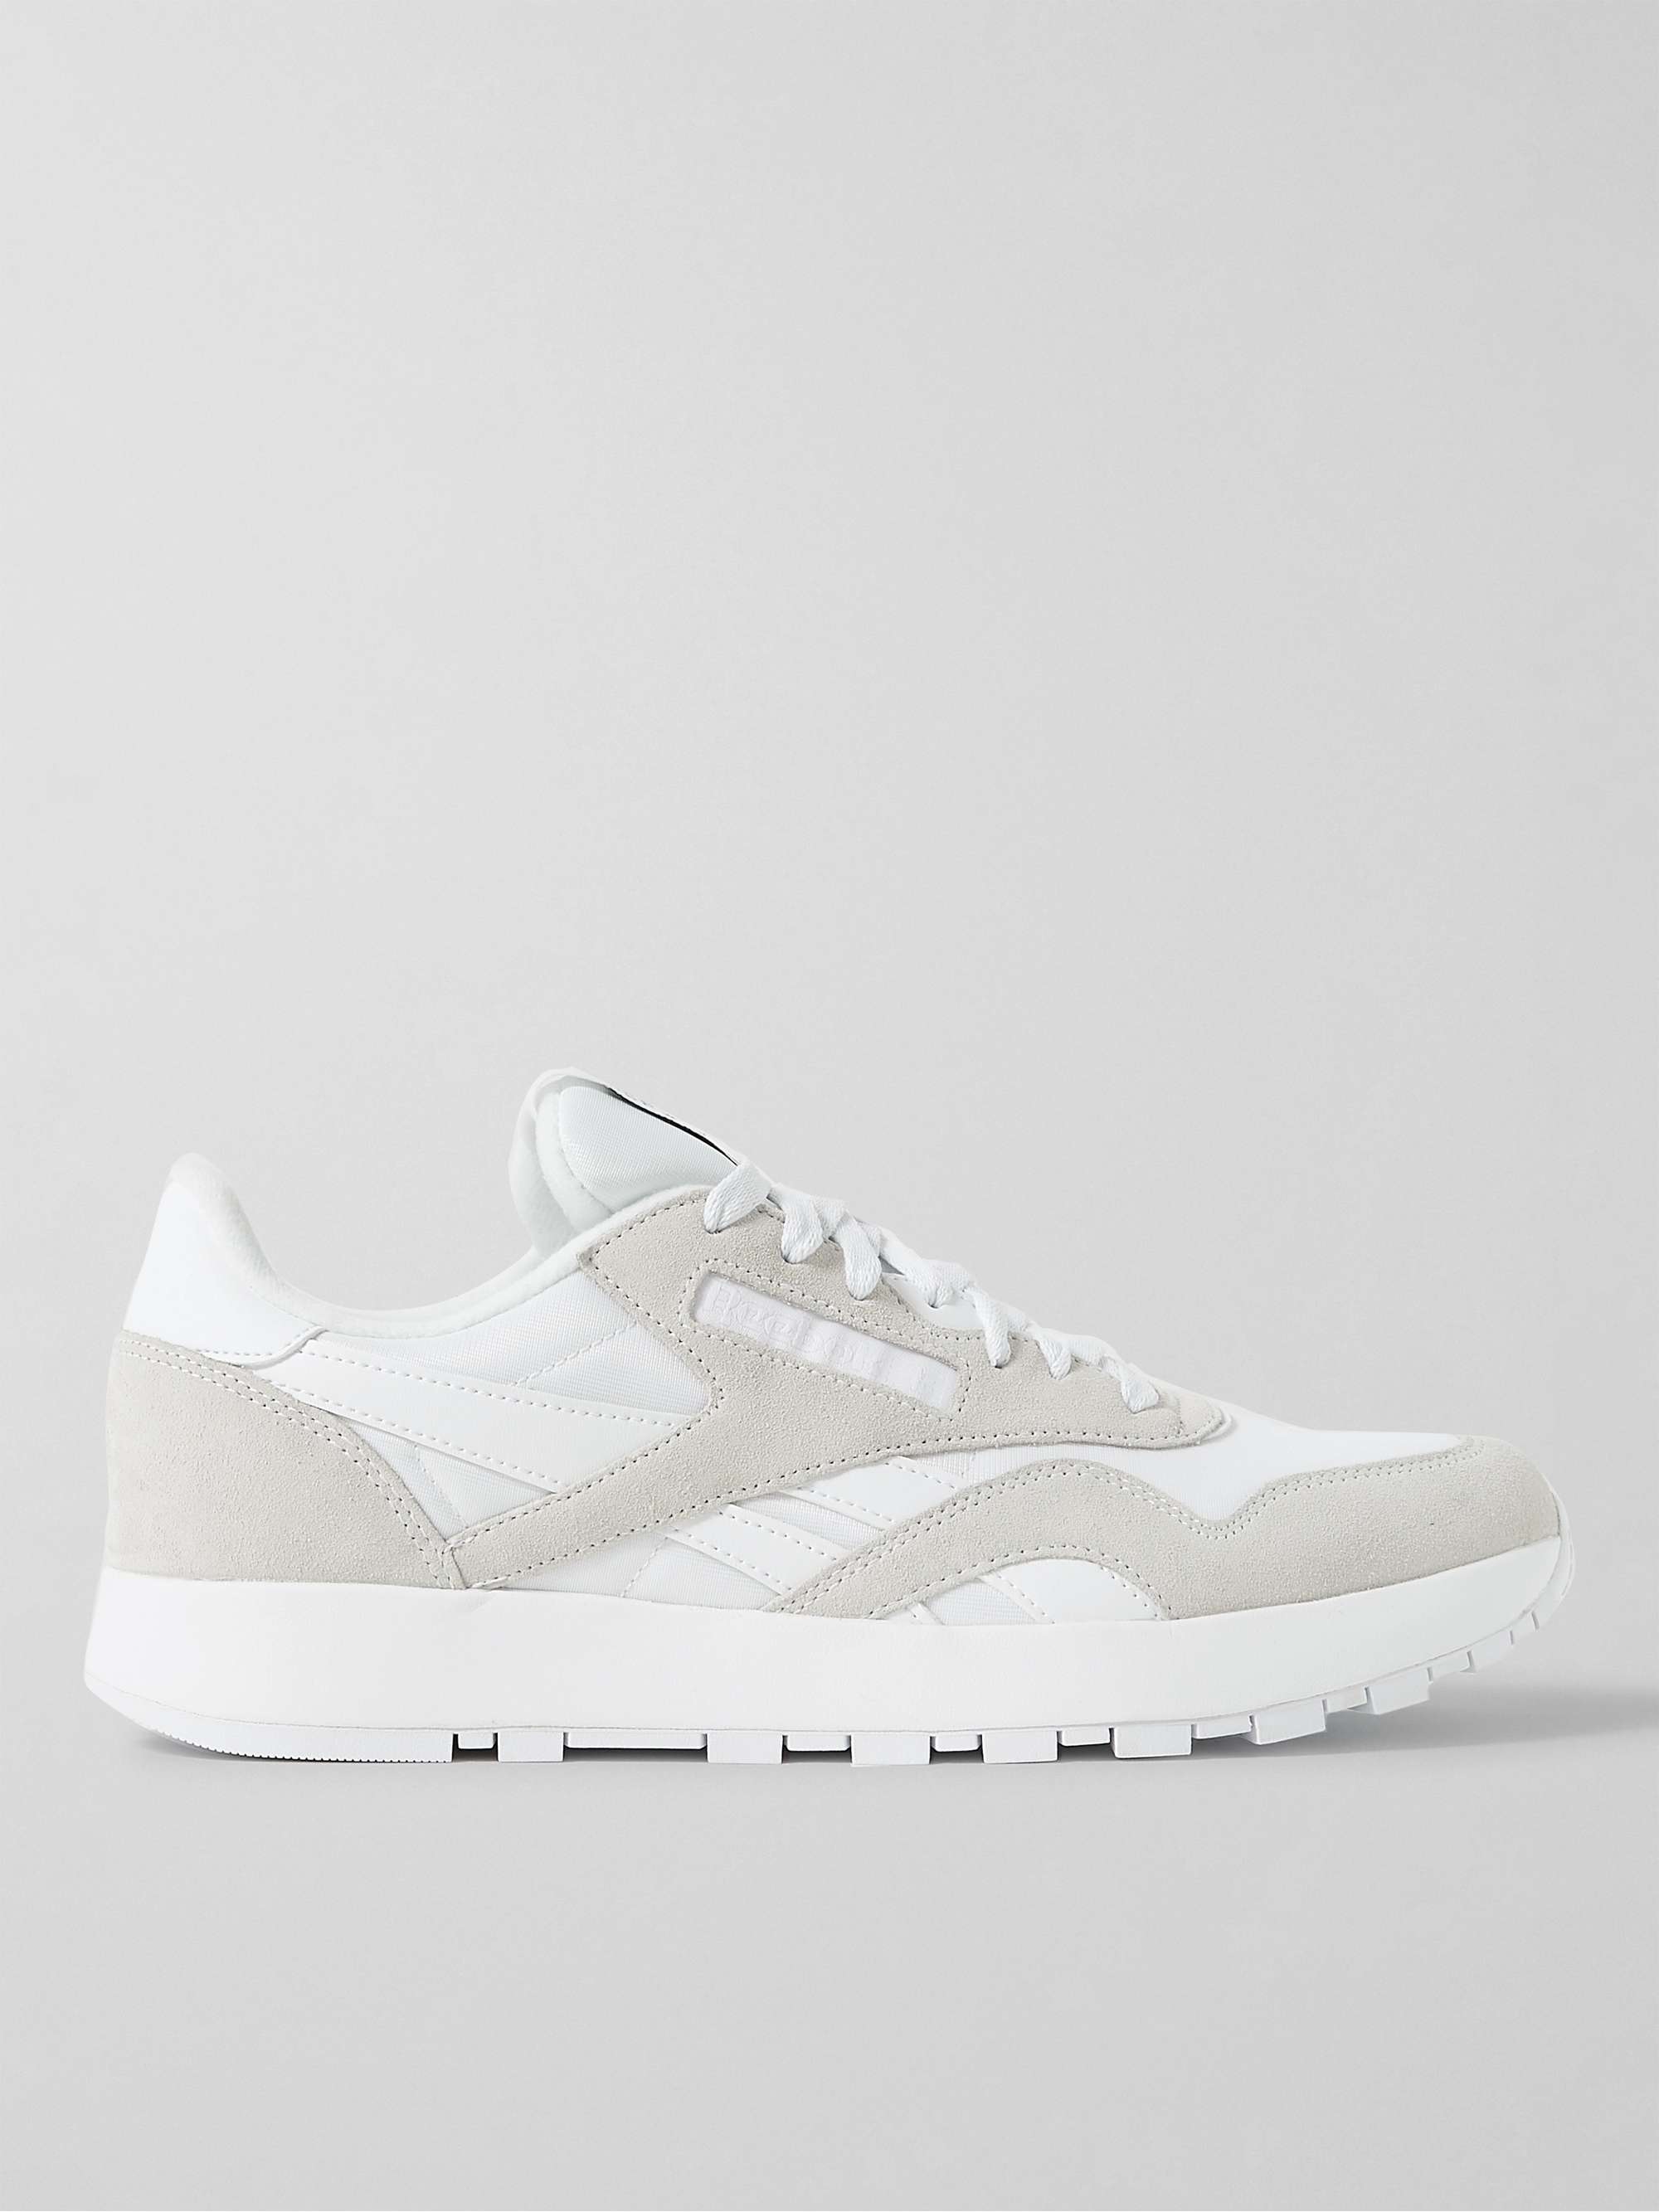 REEBOK + Maison Margiela 0 Shell, Suede and Leather Sneakers | MR PORTER